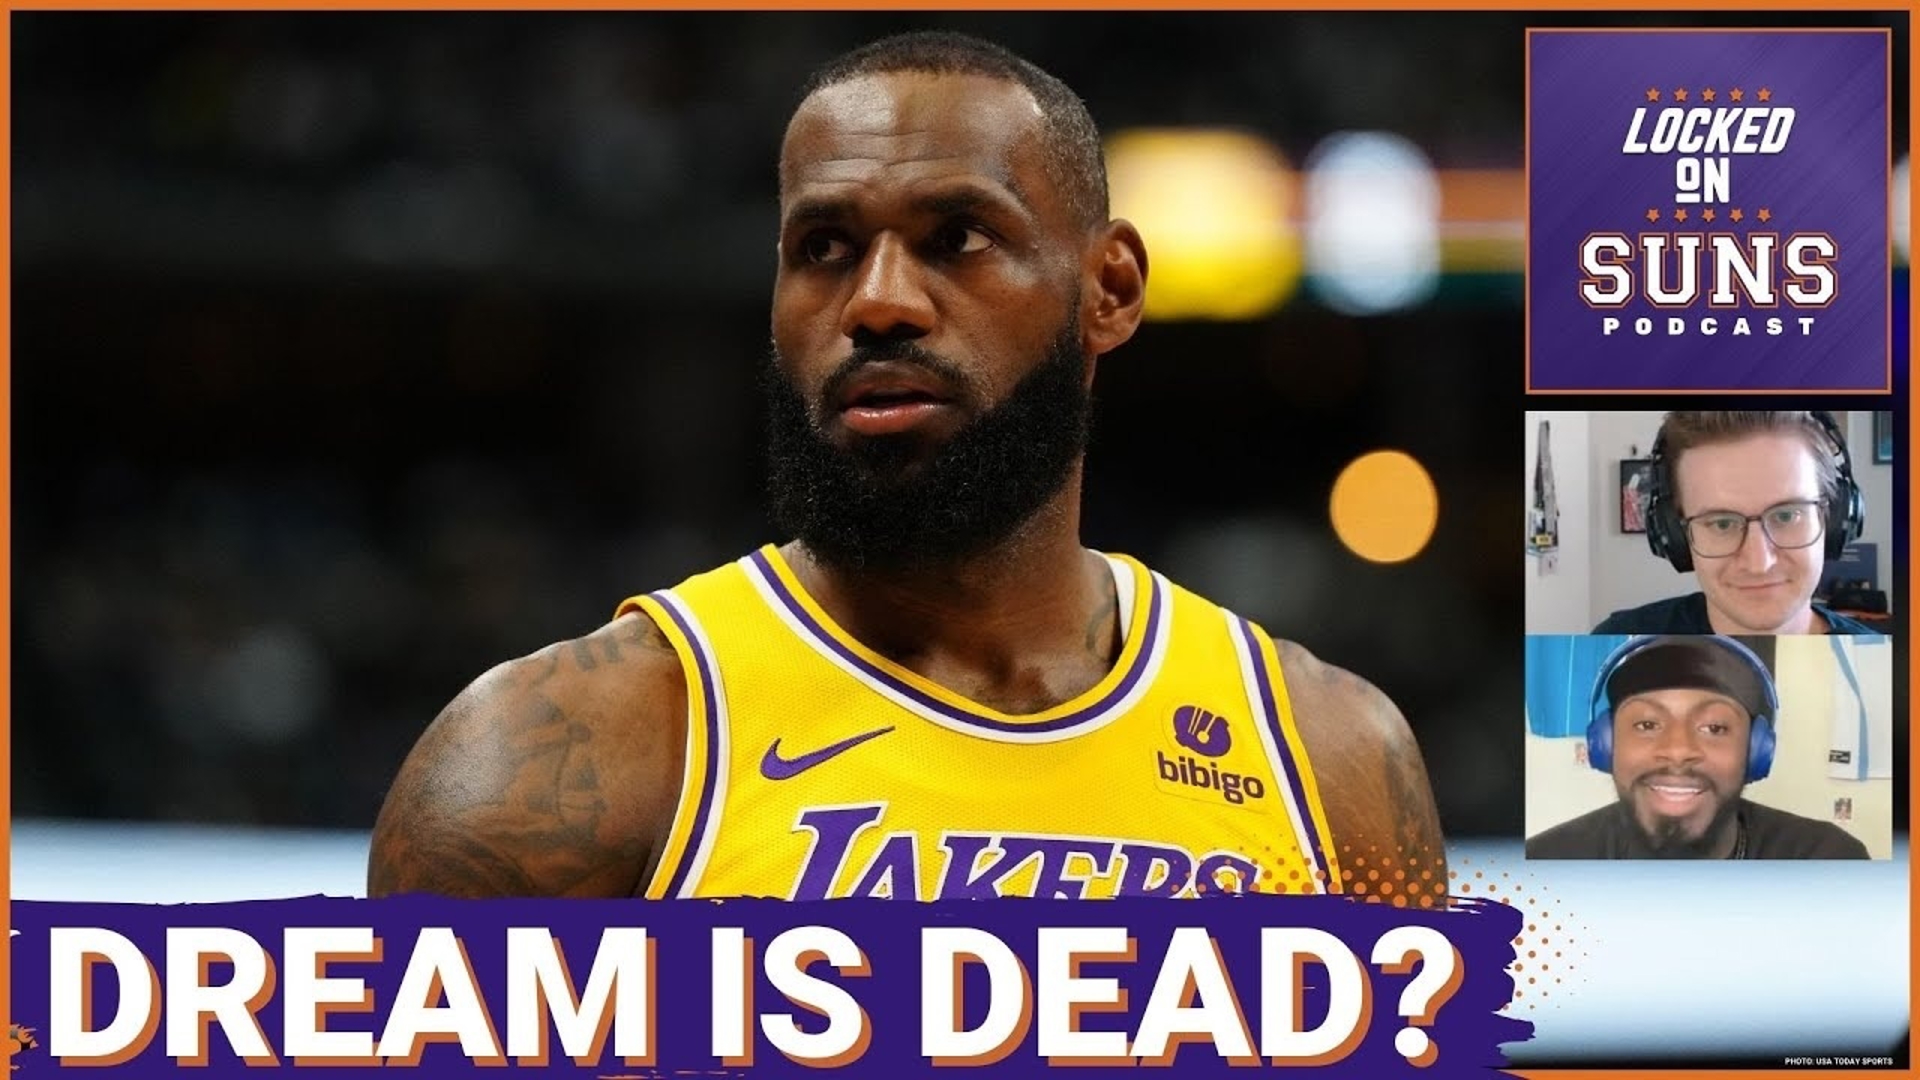 LeBron James agent Rich Paul said he is not coming to the Phoenix Suns on a minimum contract. What now?